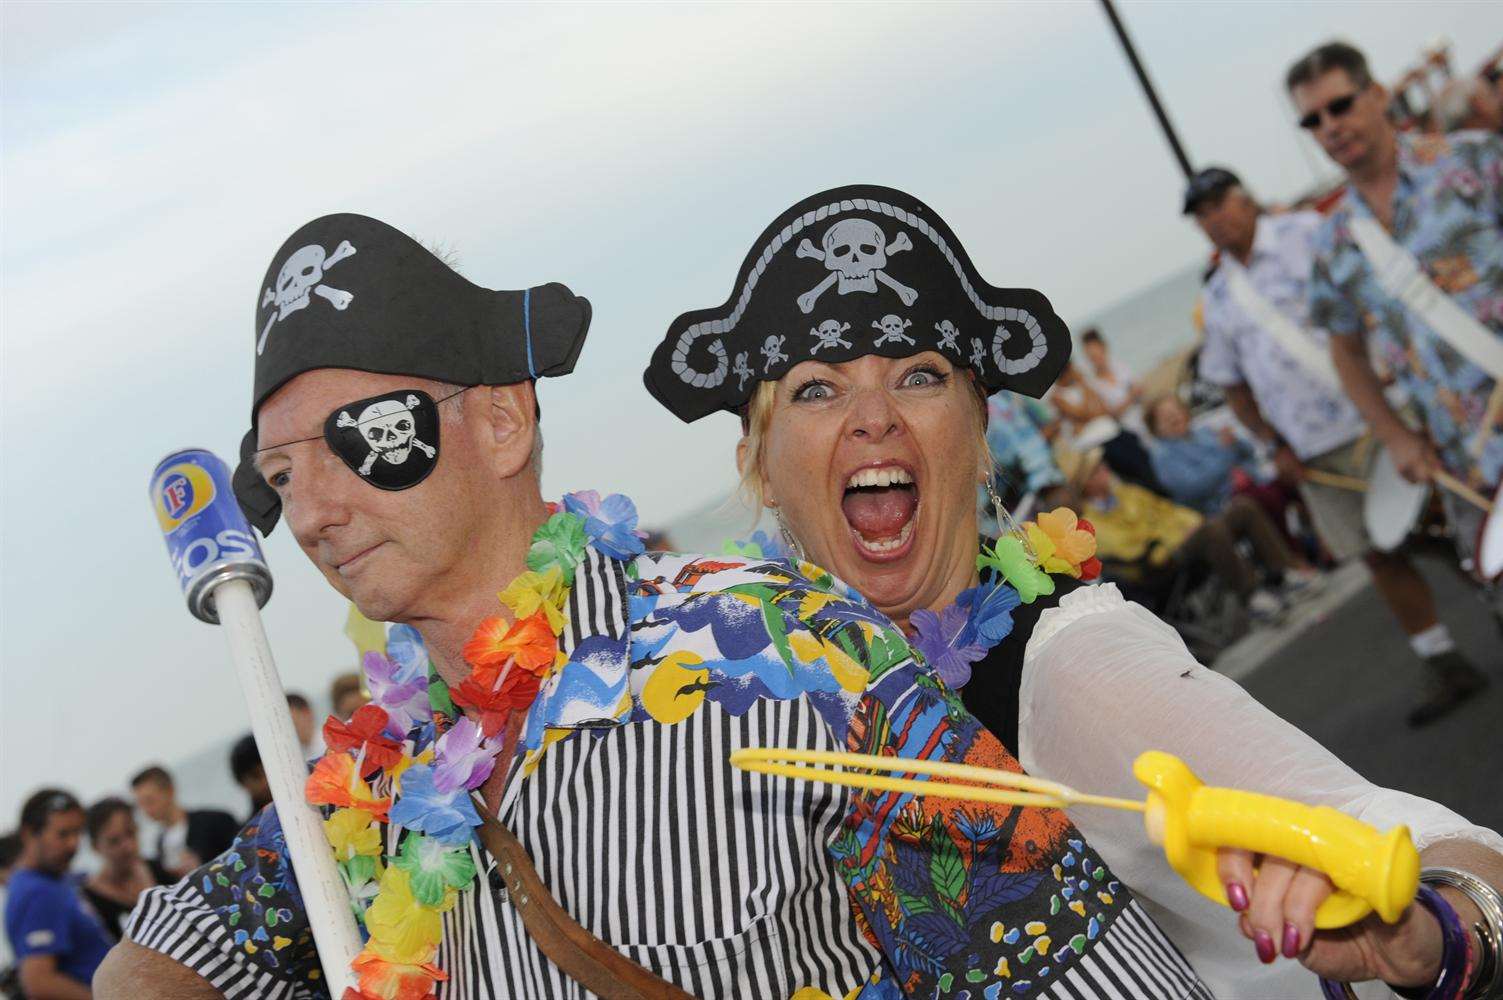 Derek Lindars and Vanessa Short dressed as pirates, promoting the Sergeants' Mess Panto Pirates of the Curried Bean